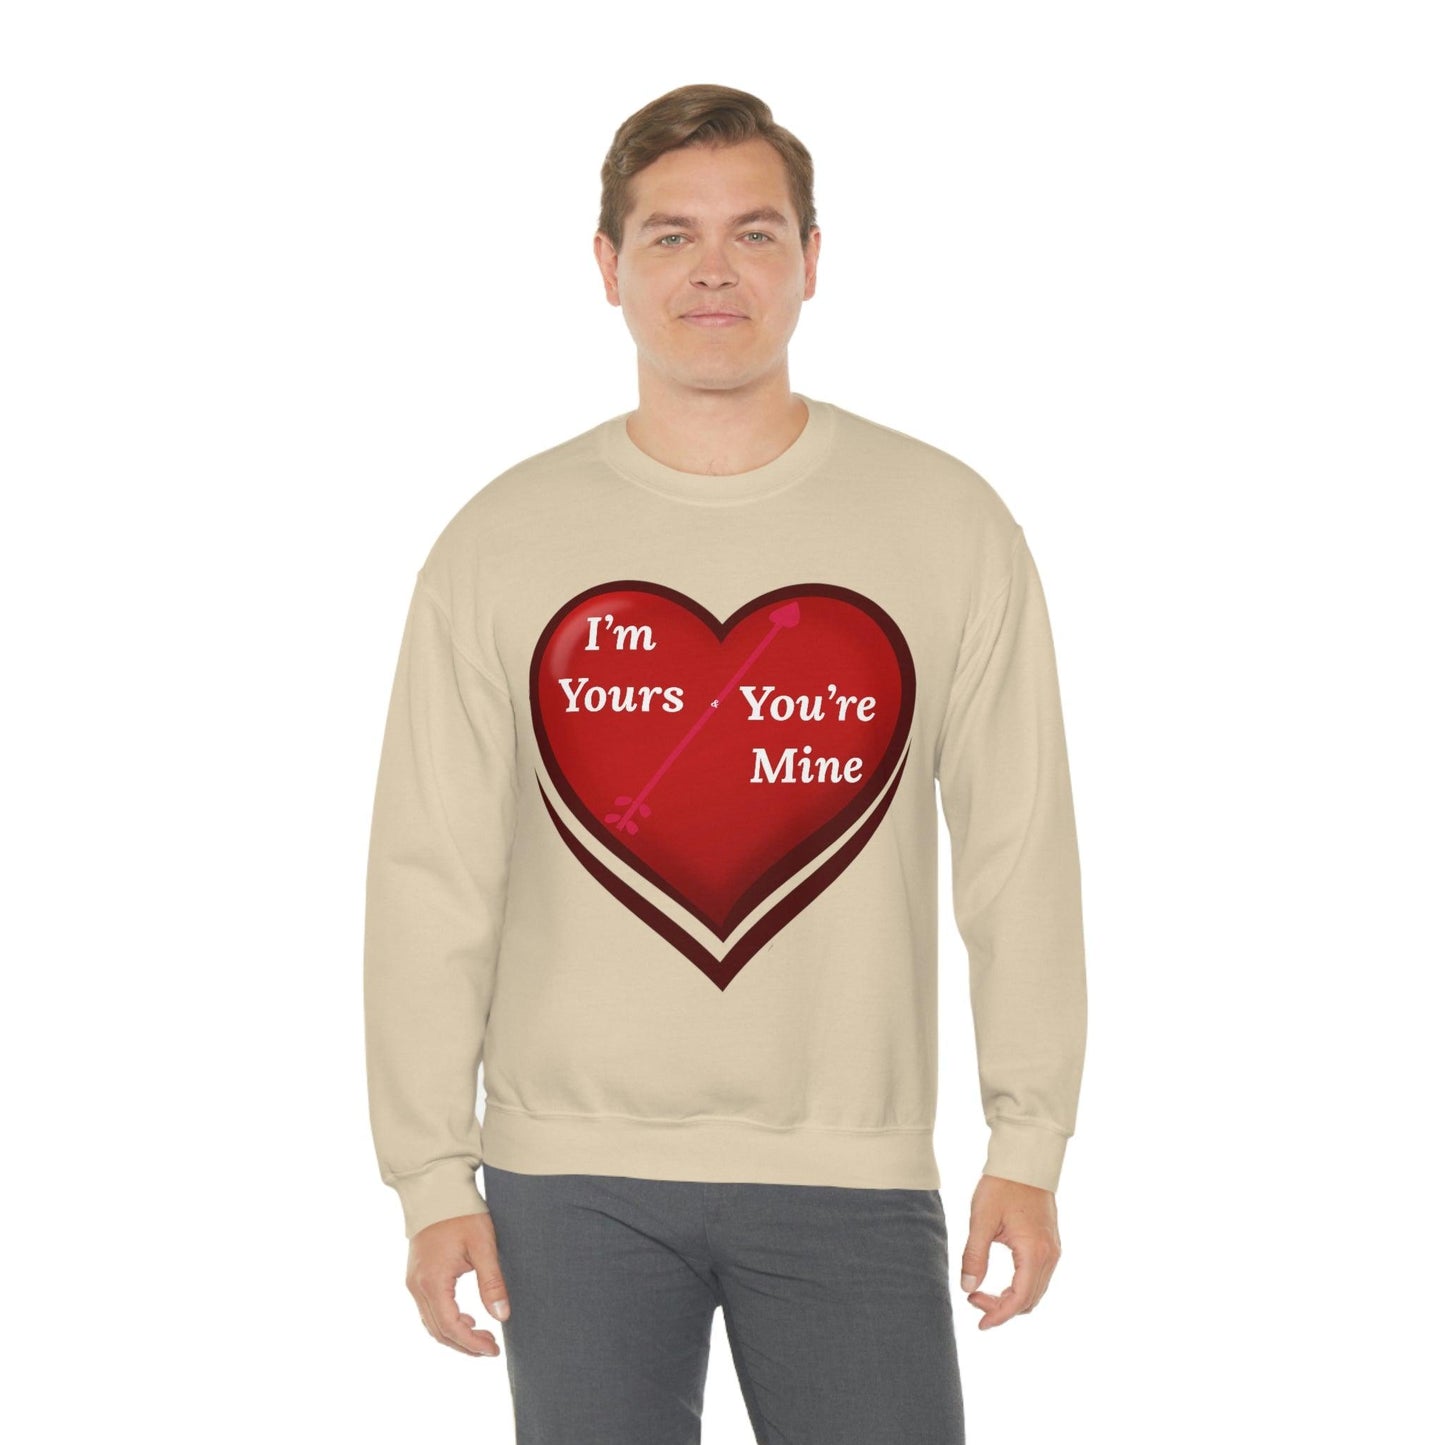 I'm Yours and You're Mine Heart Sweatshirt